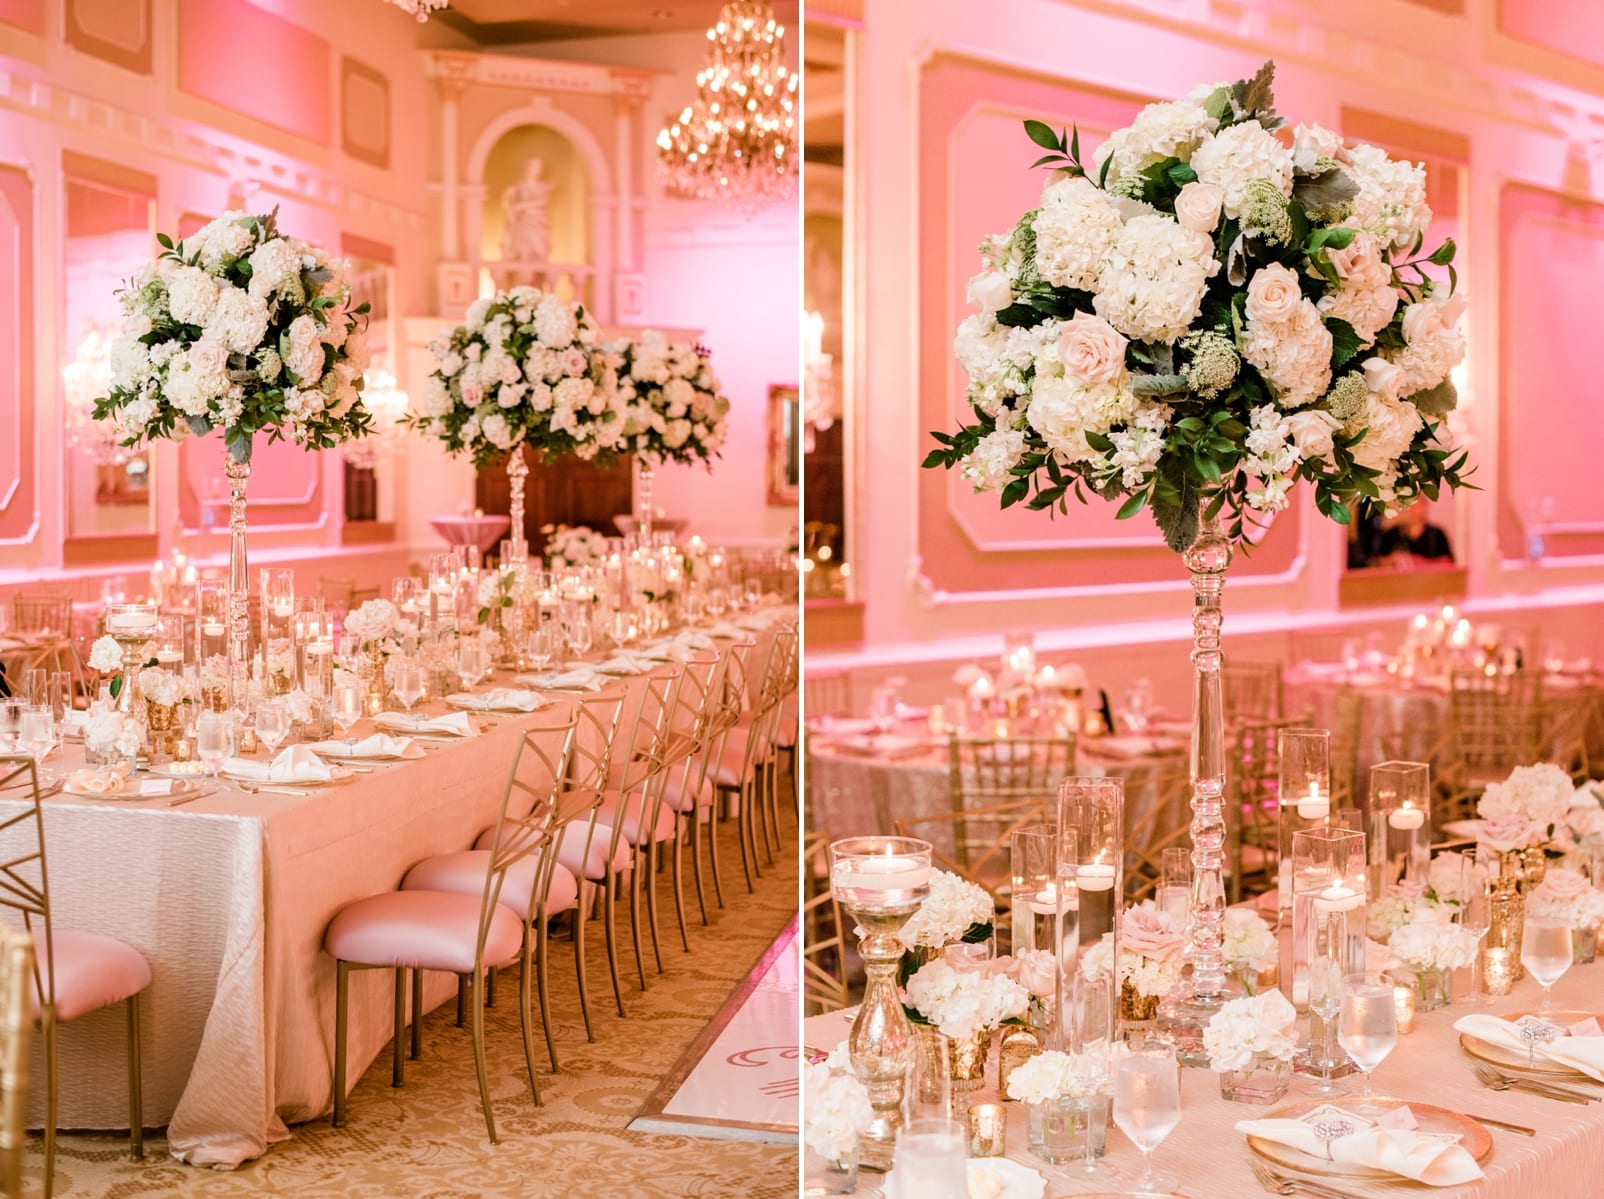 Grand Marquise ballroom wedding reception with gold chairs and tall floral centerpieces photo